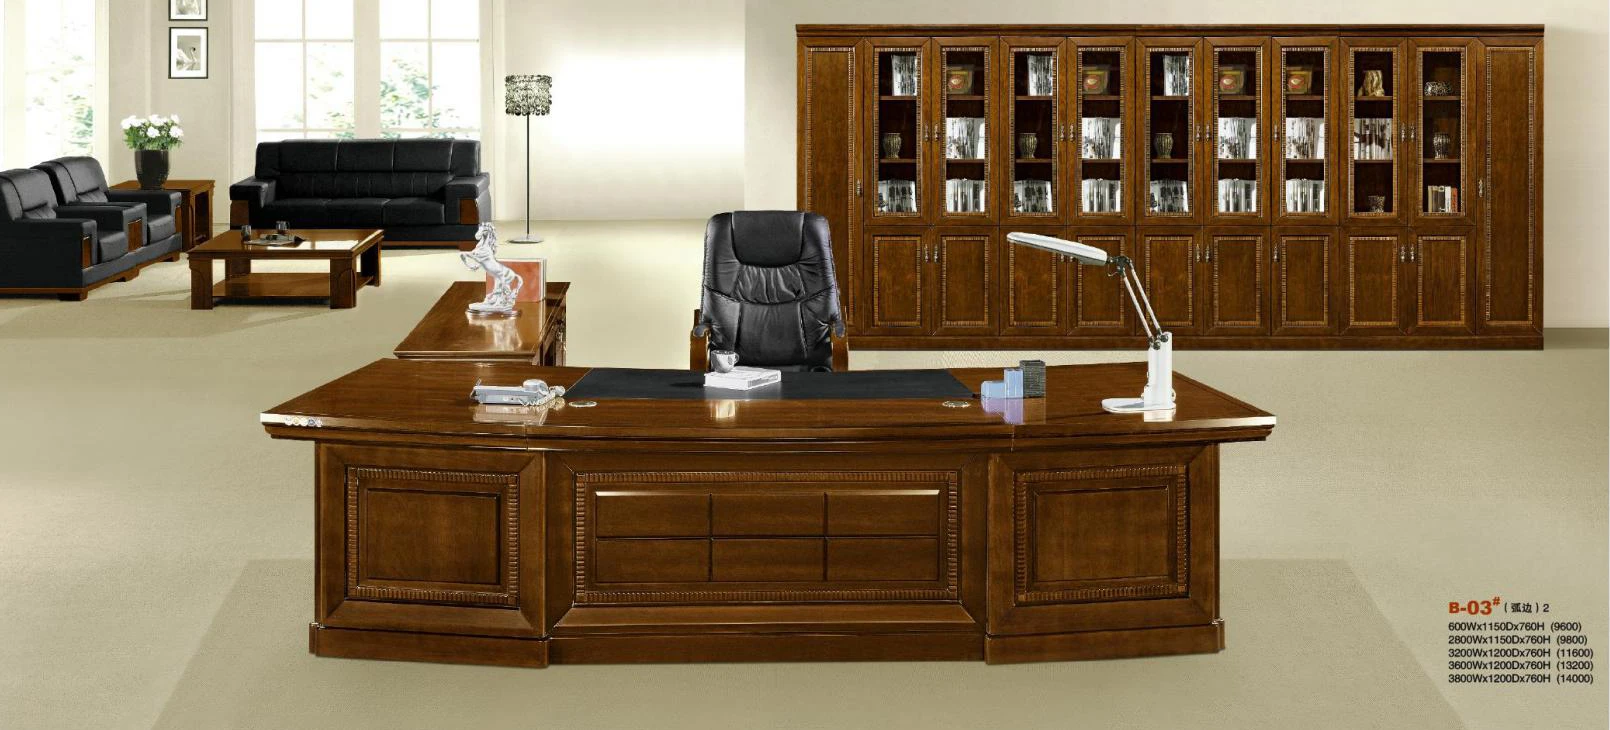 The Power of Customization: MDF Veneer Painting for Exquisite Executive Office Tables